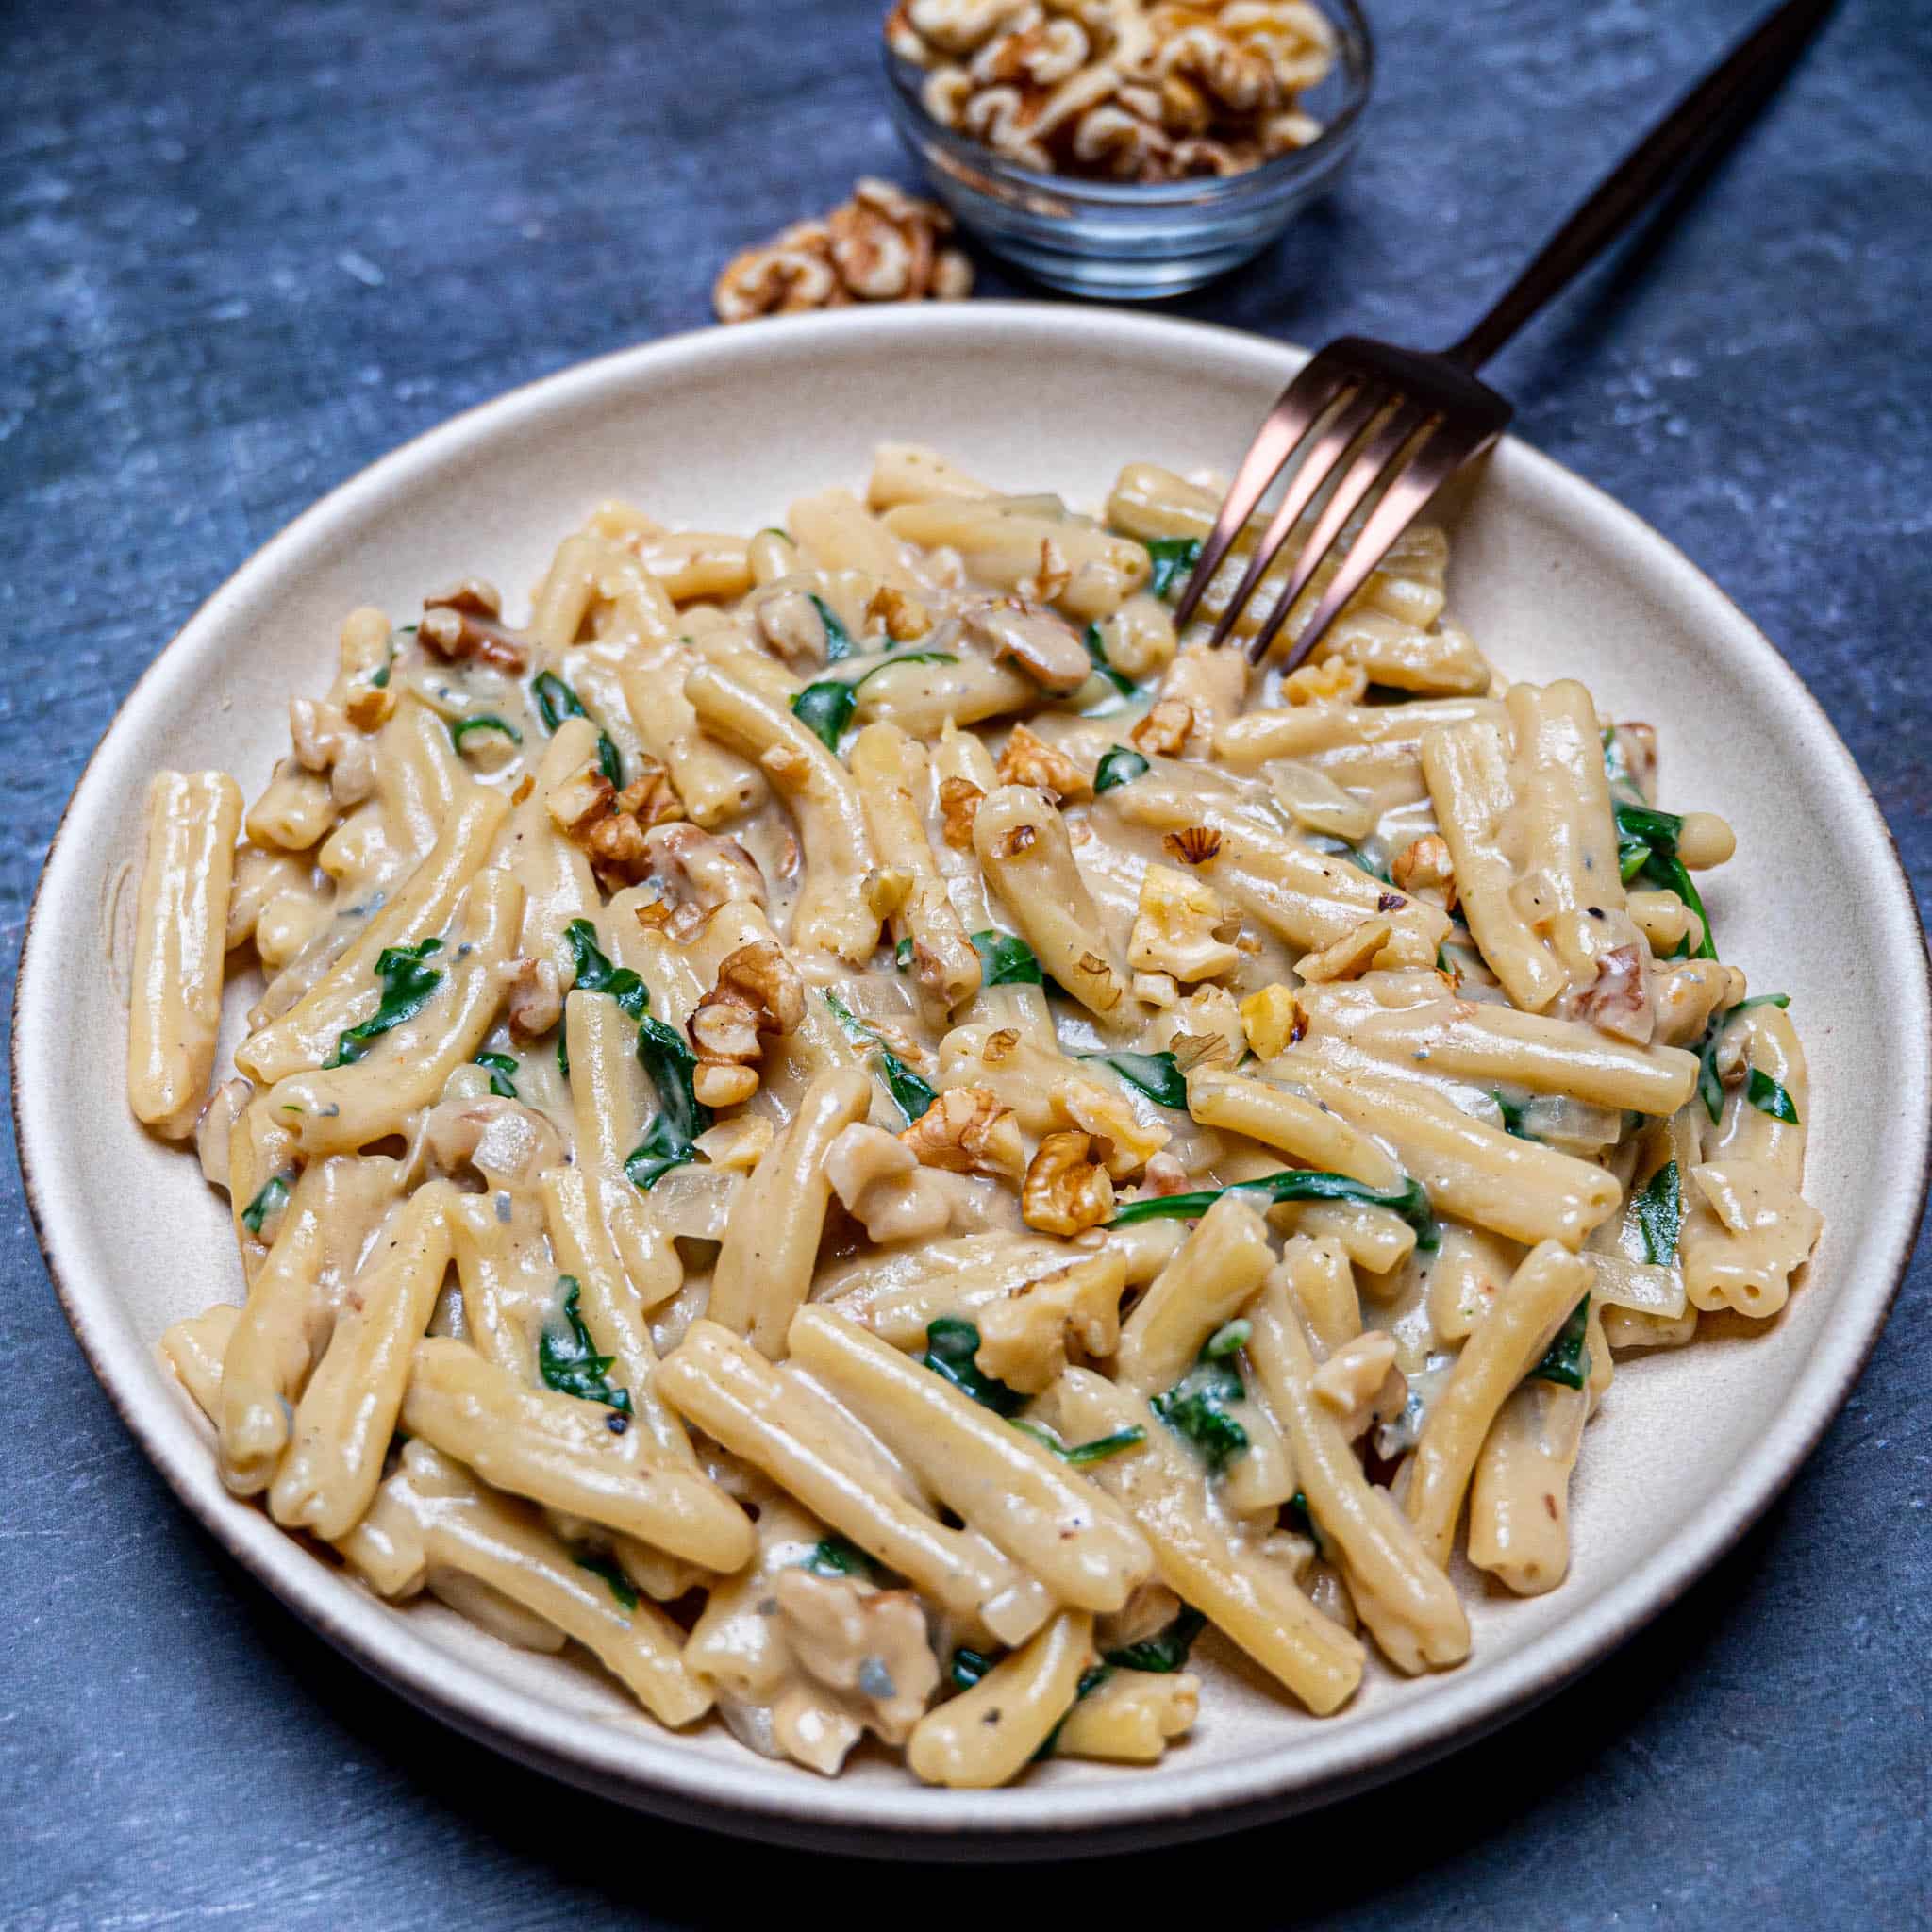 Make Flavorful Pasta With Gorgonzola Cheese Sauce In Under 15 Minutes! 